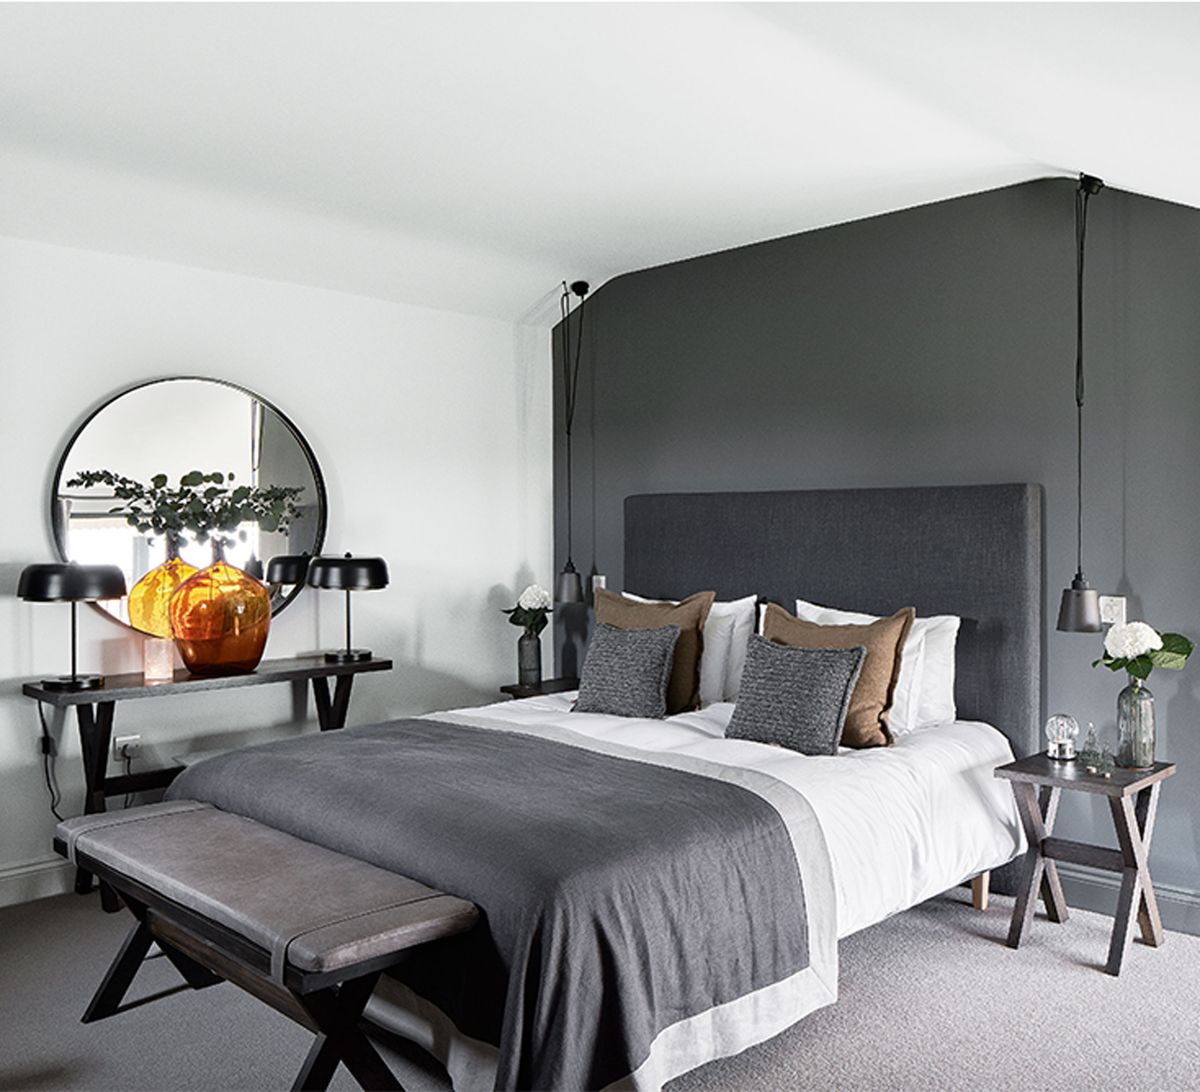 Men's grey bedroom ideas to give the neutral shade a twist